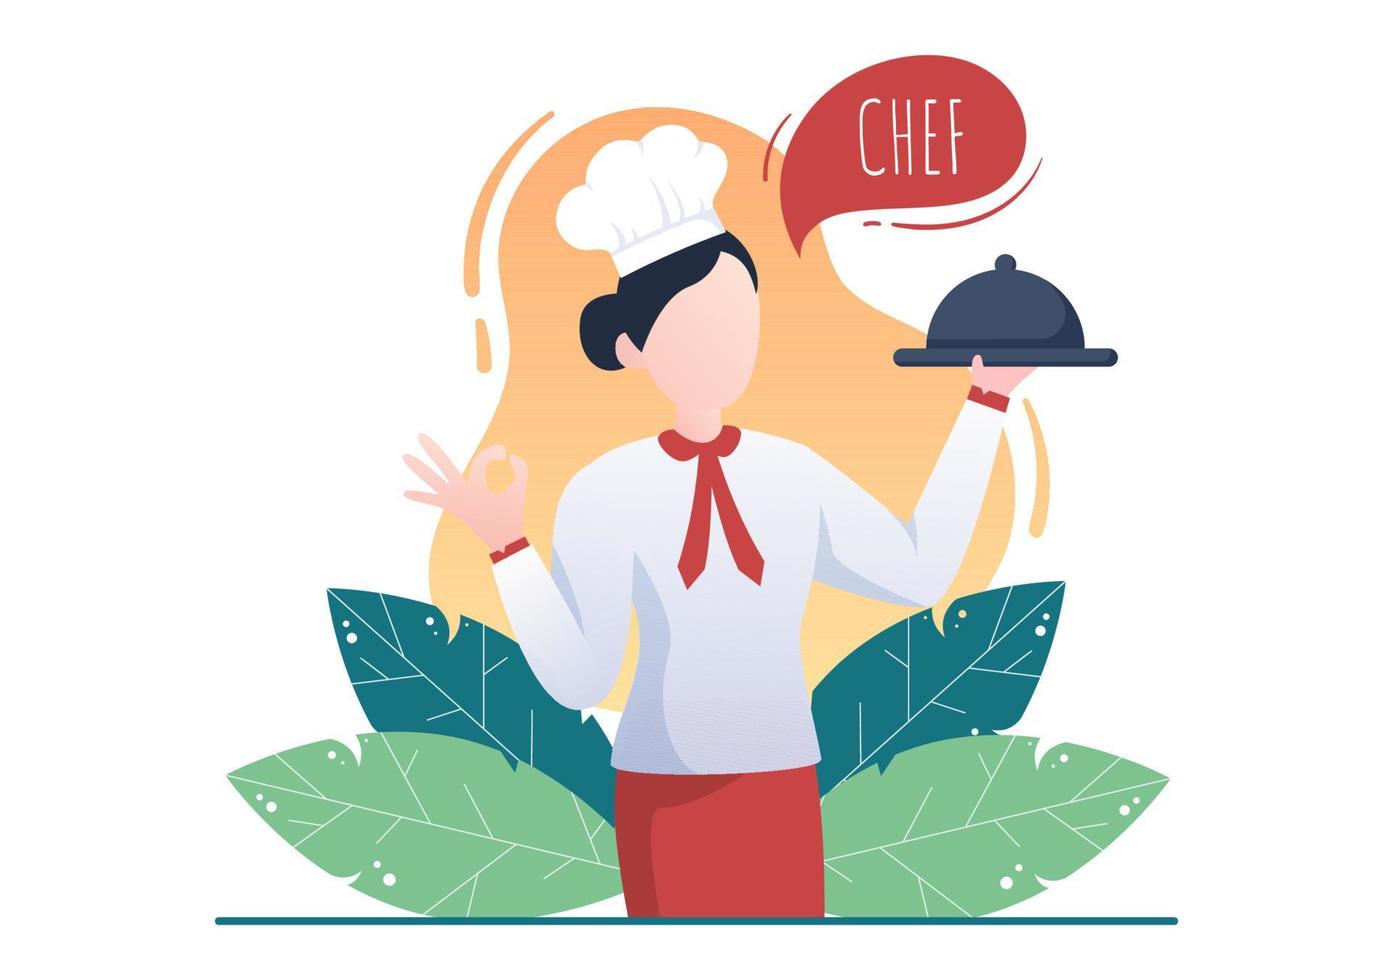 Professional Chef Cartoon Character Cooking Illustration with Different Trays and Food to Serve Delicious Food Suitable for Poster or Background vector